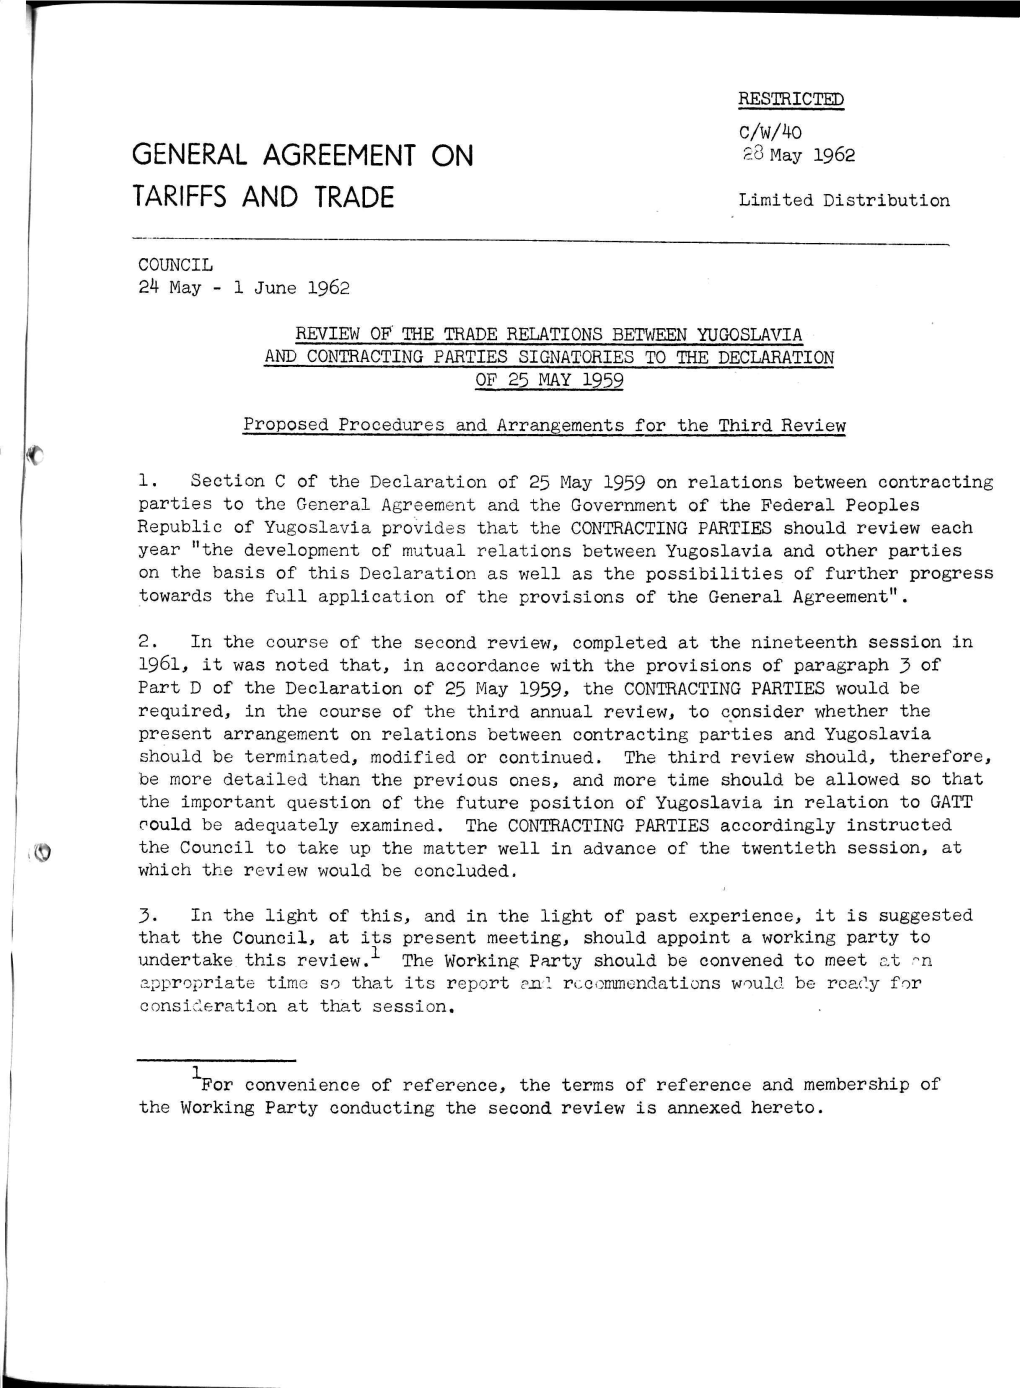 GENERAL AGREEMENT on ^ May 1962 TARIFFS and TRADE Limited Distribution